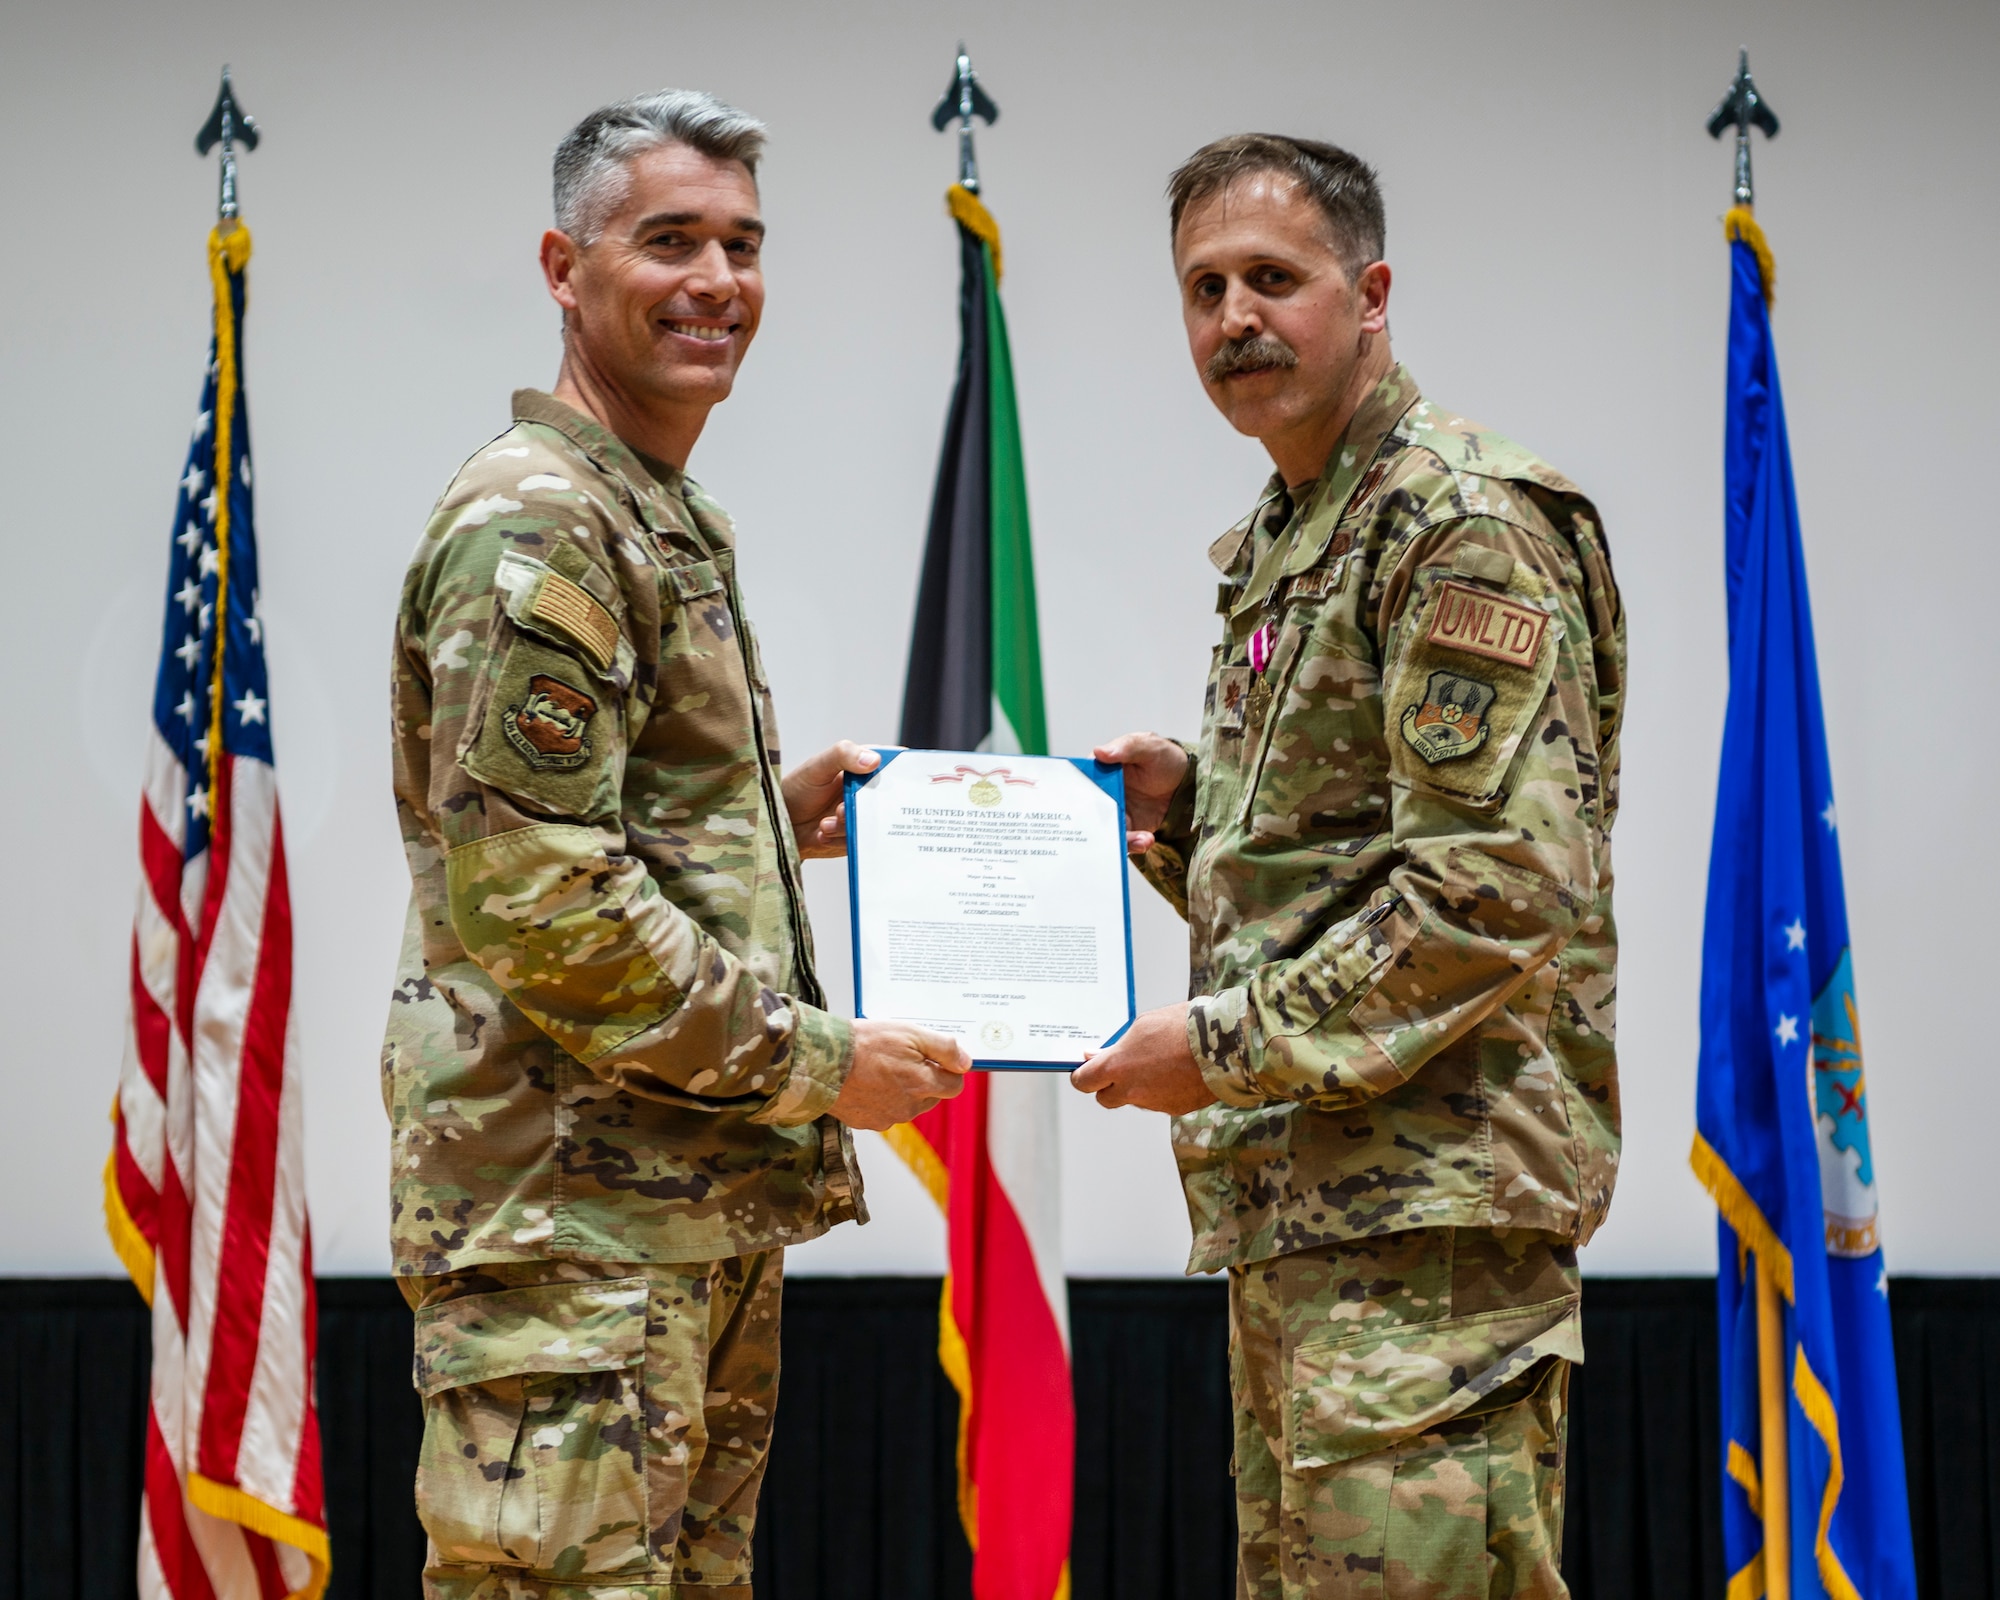 Col. George Buch, Jr., 386th Air Expeditionary Wing commander, presents a Meritorious Service Medal to Maj. James Dunn, outgoing 386th Expeditionary Contracting Squadron commander